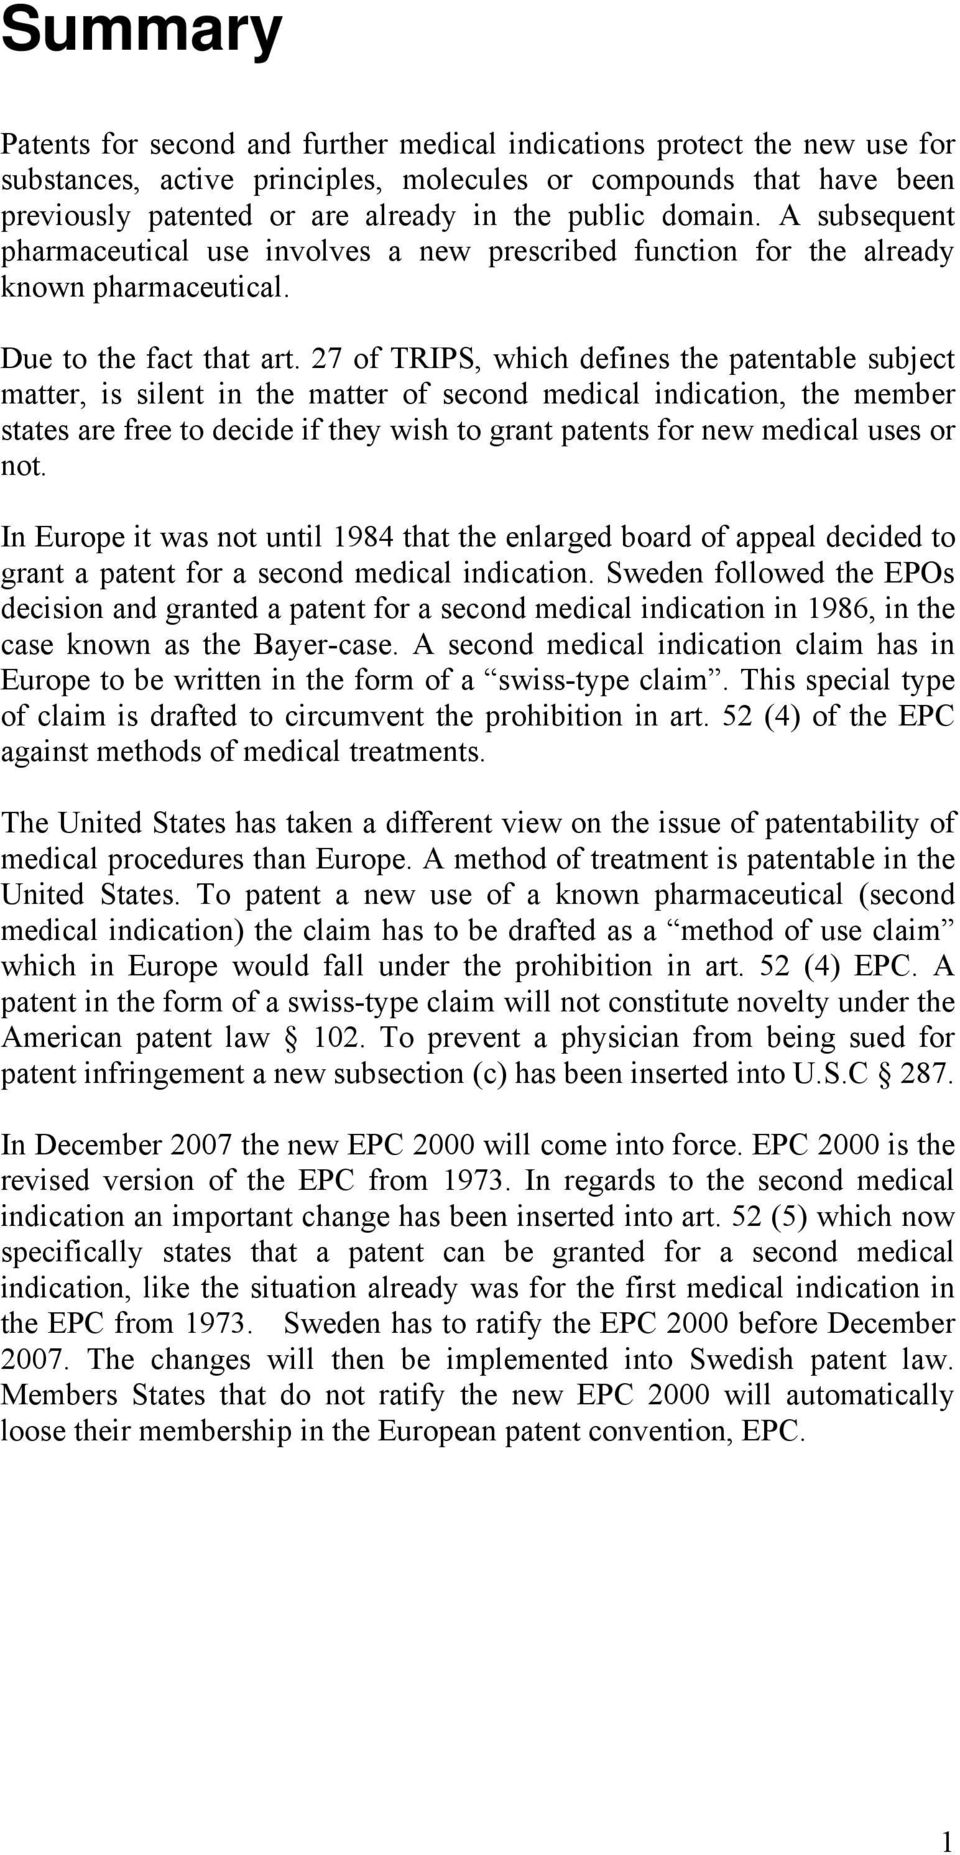 27 of TRIPS, which defines the patentable subject matter, is silent in the matter of second medical indication, the member states are free to decide if they wish to grant patents for new medical uses